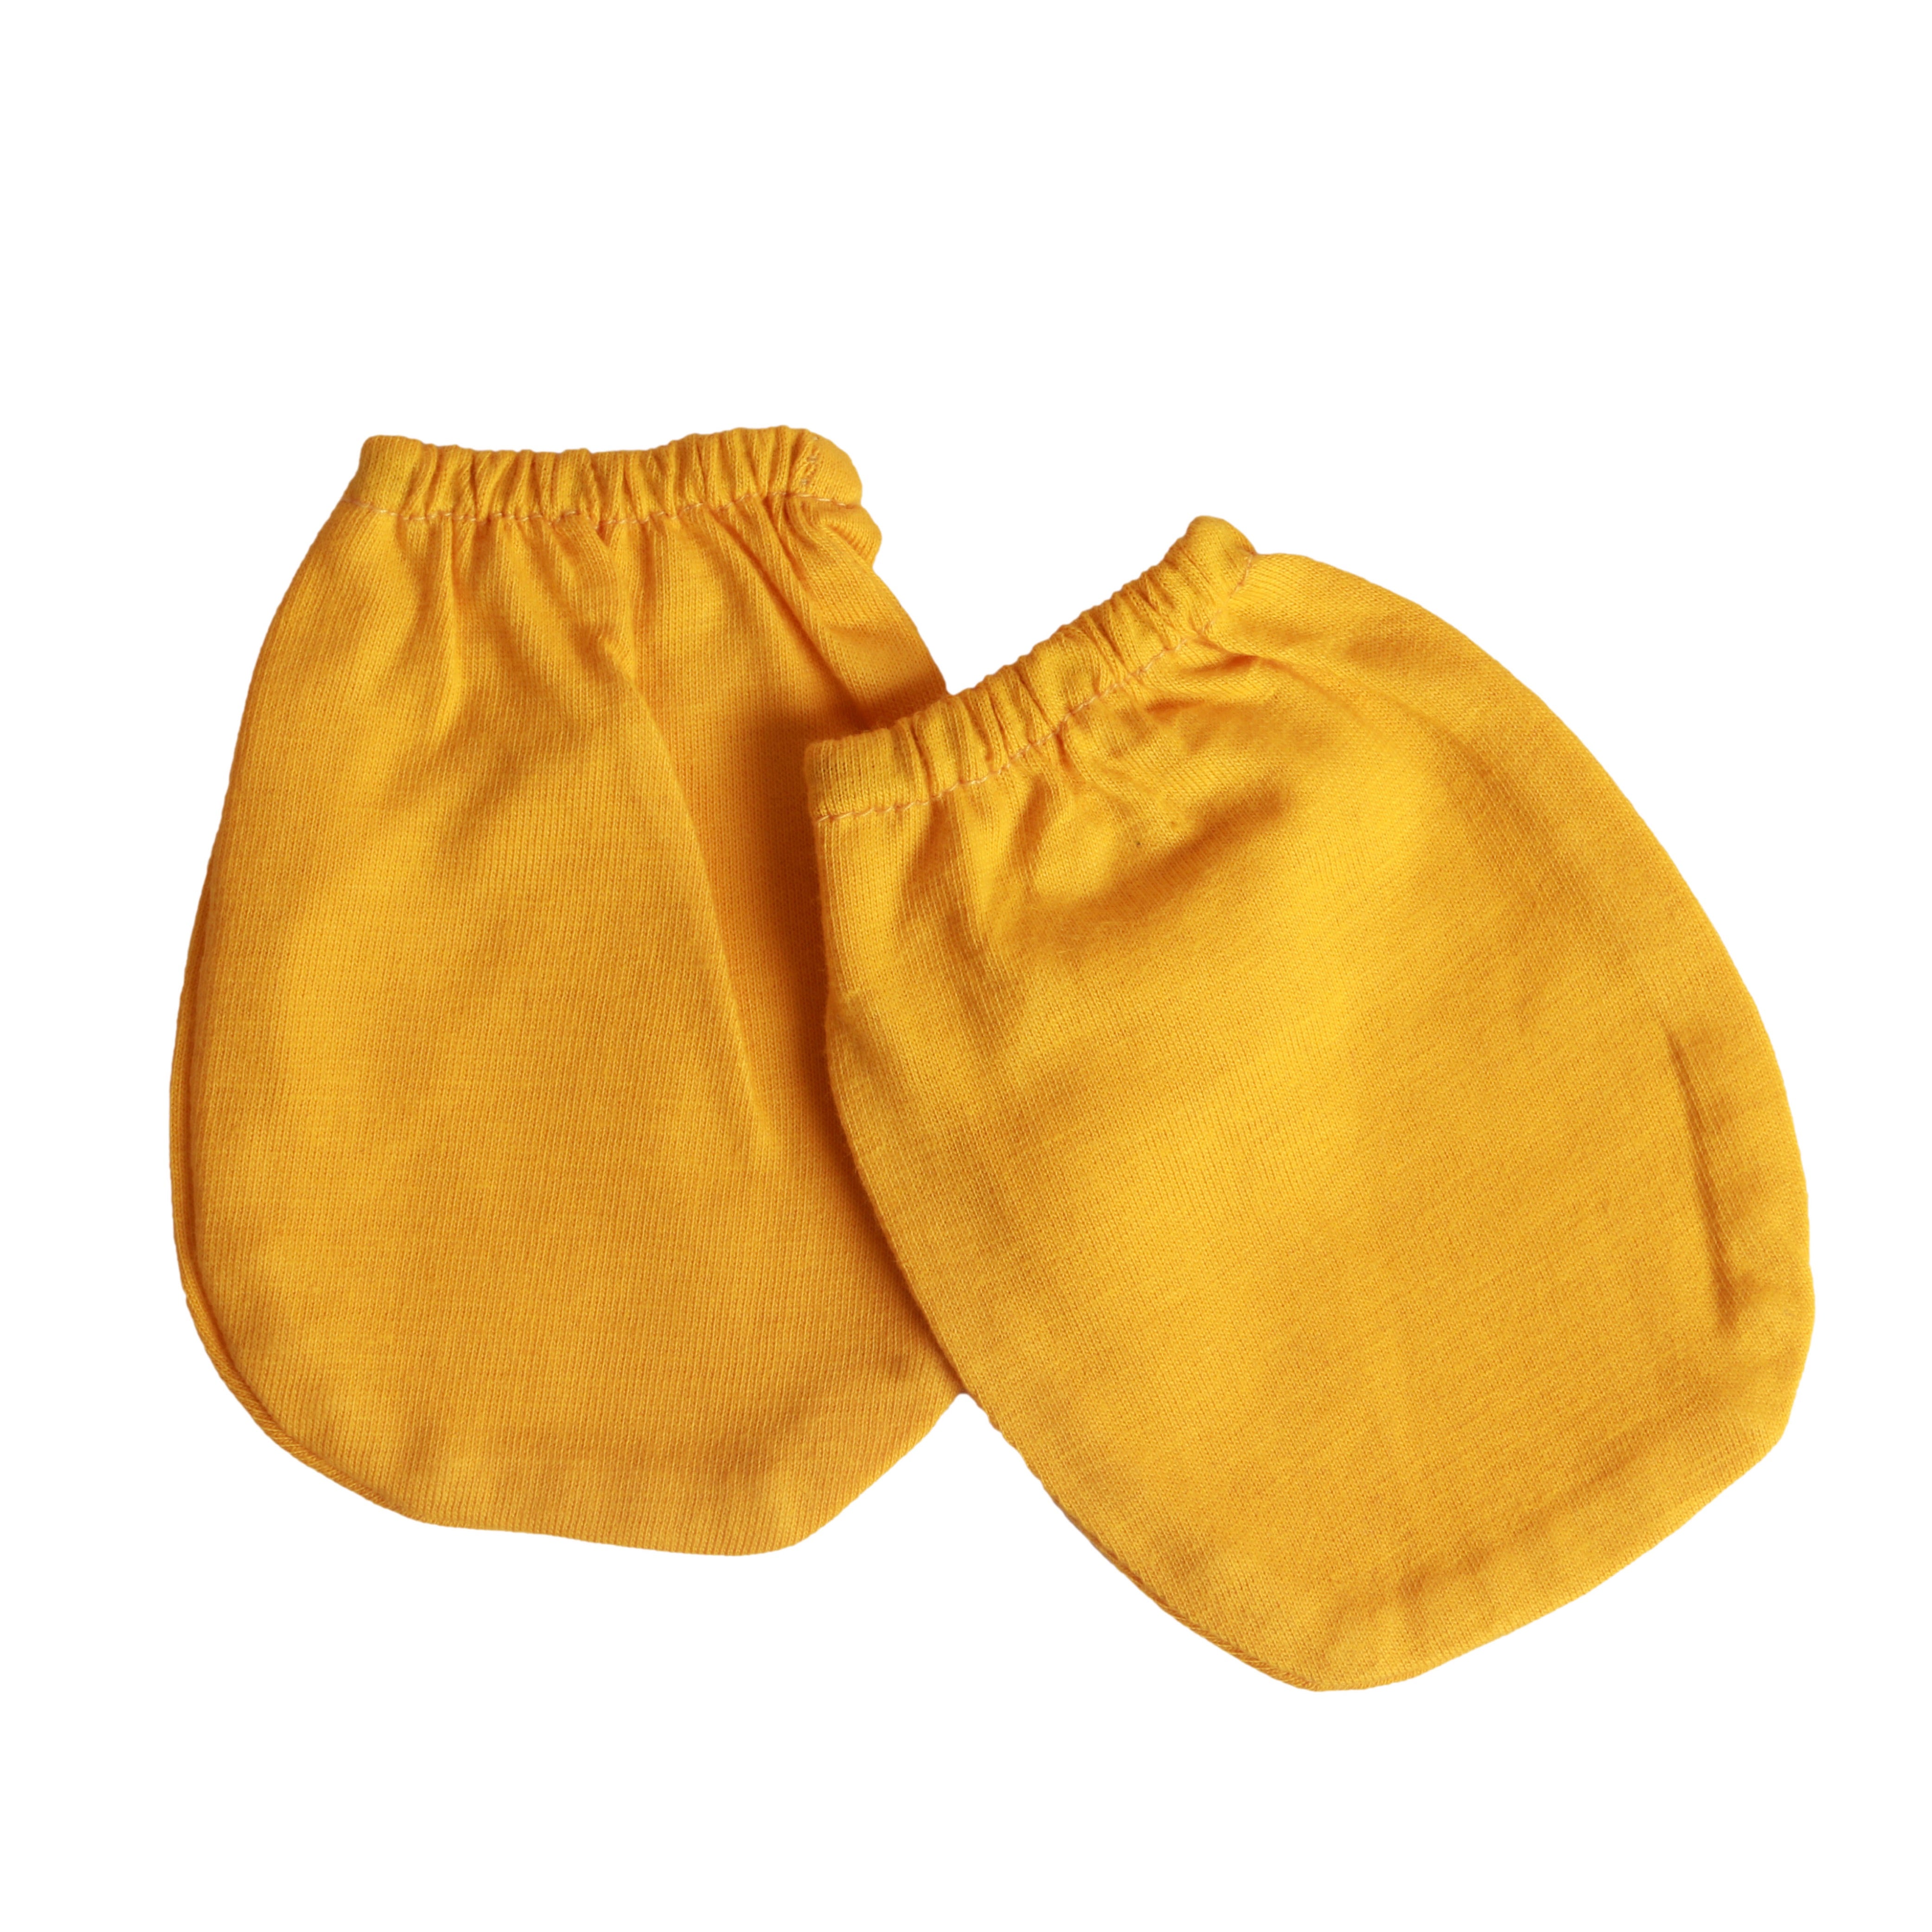 Little By Little 100% Anti Viral, Cotton, Reusable, Anti bacterial & Water Repellent Baby Bibs, Booties, Mittens - Yellow